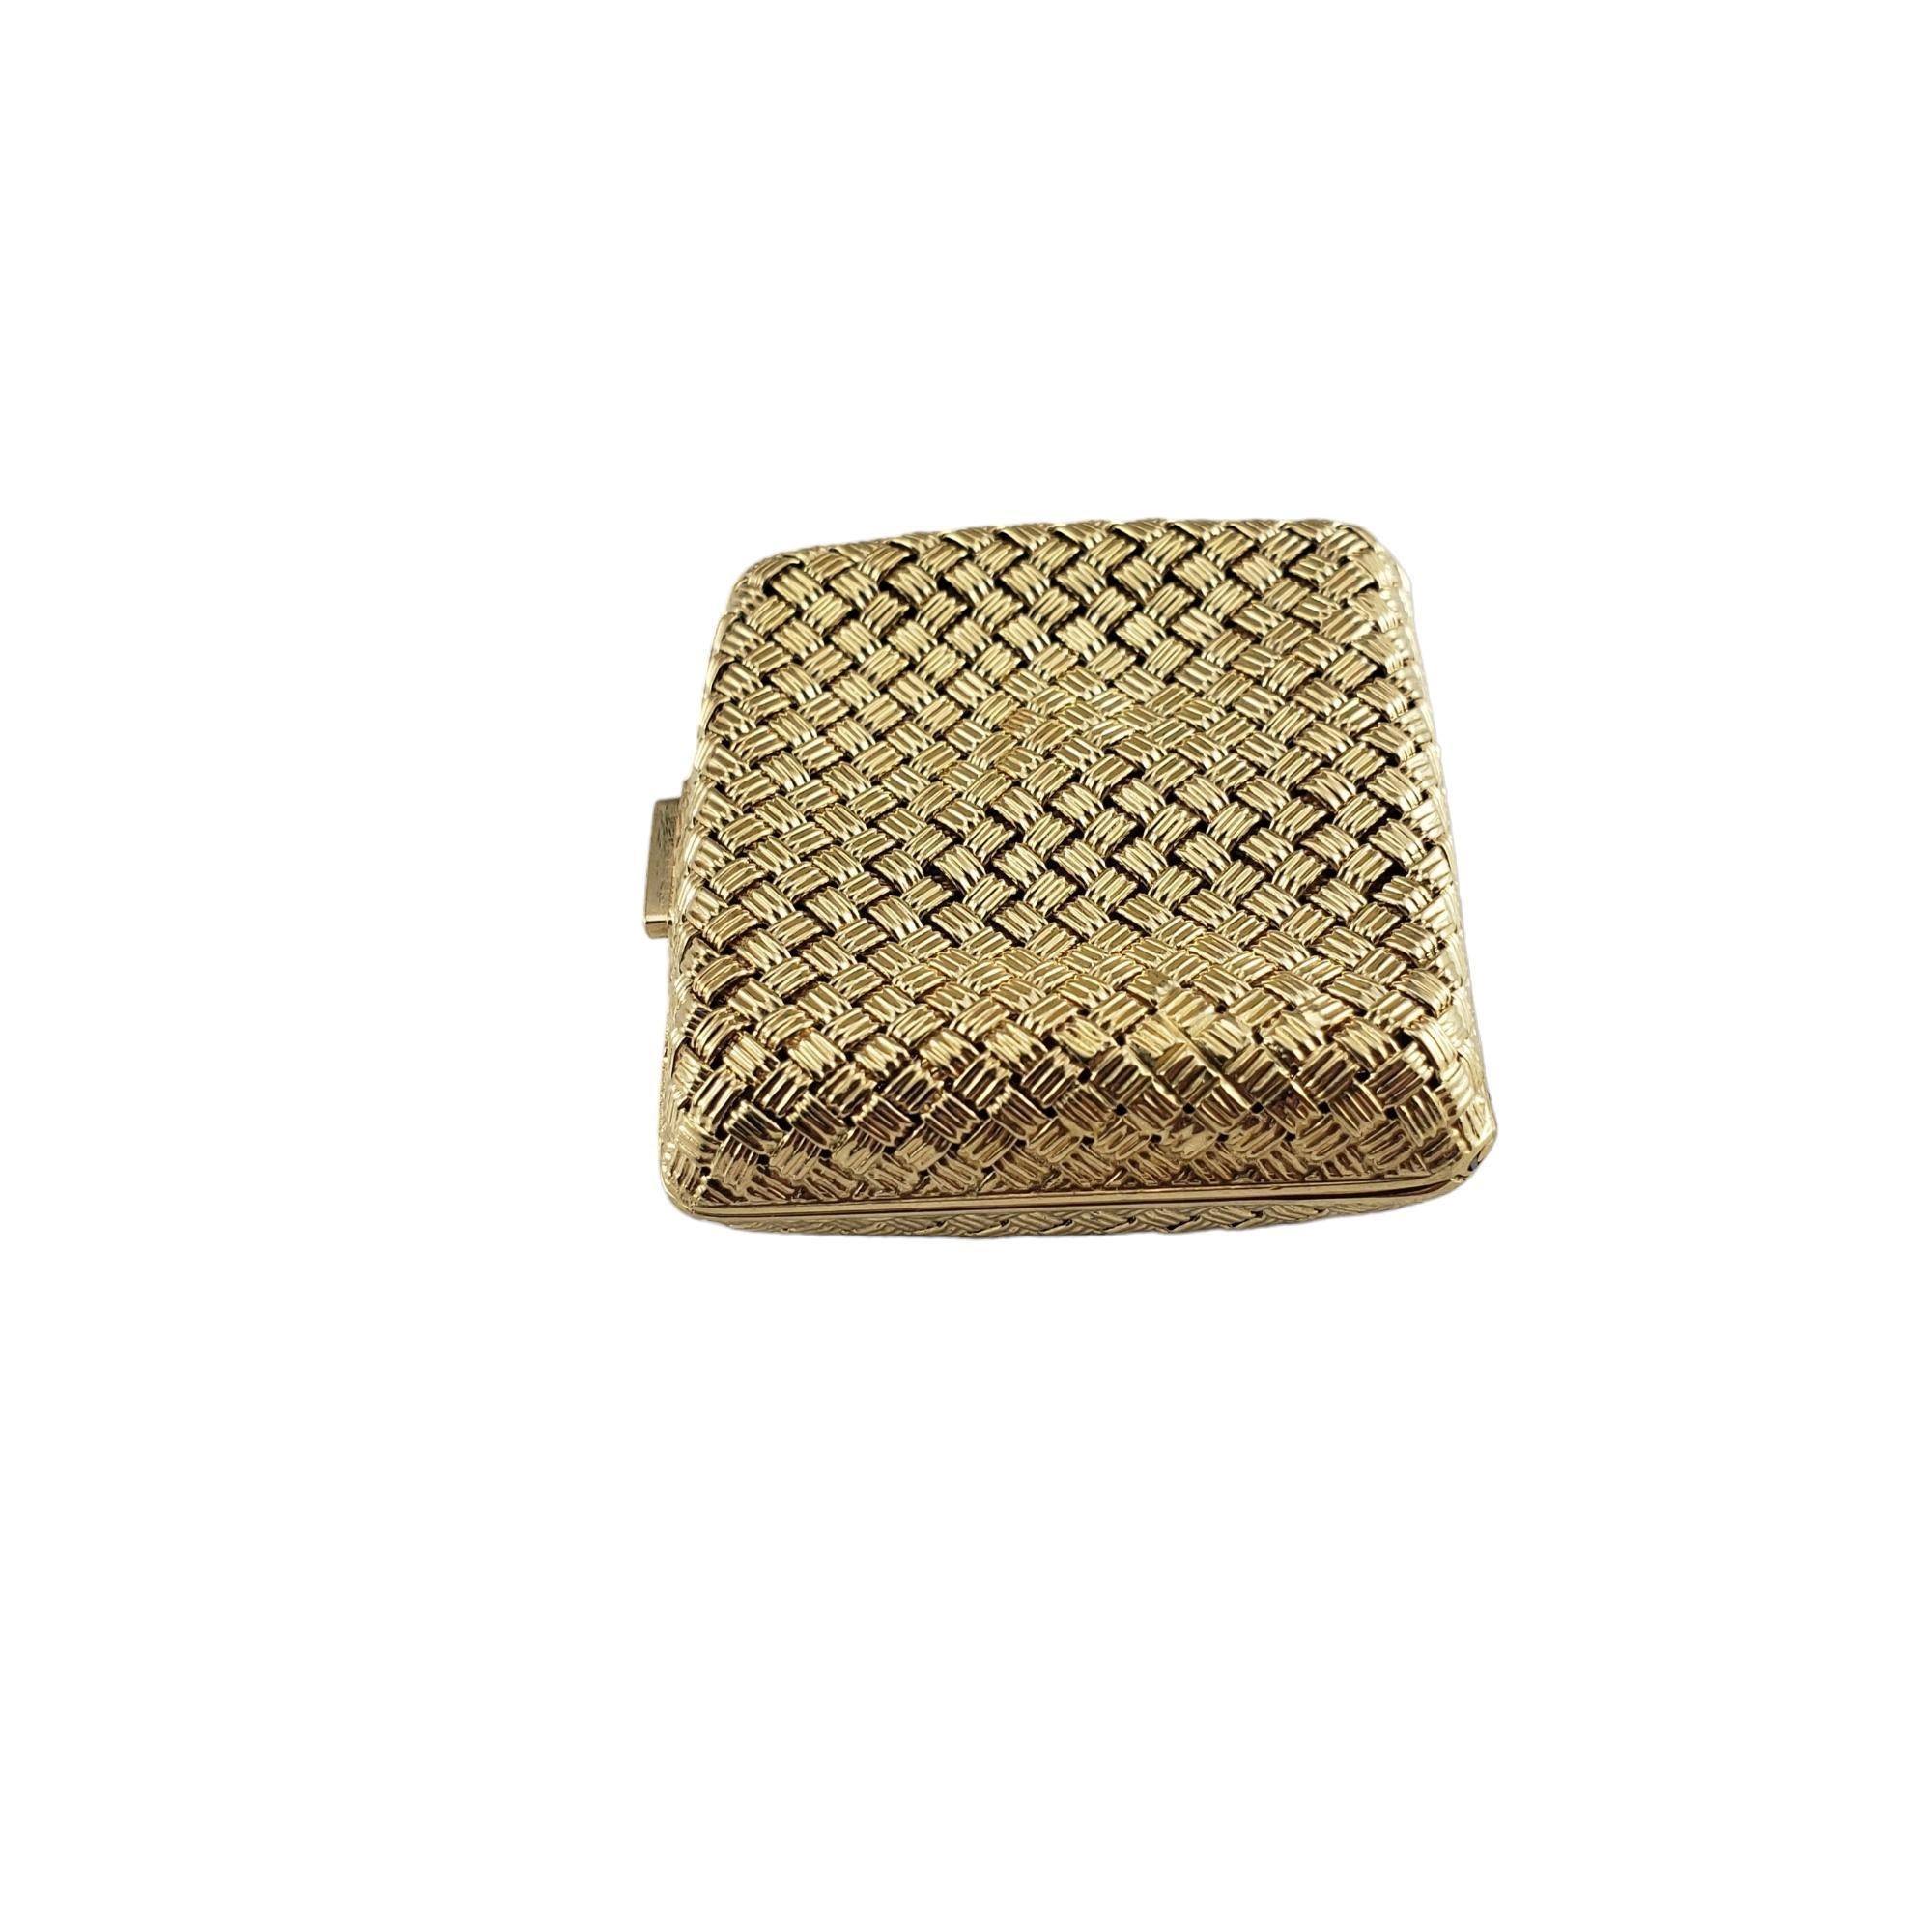 Vintage Cartier 14 Karat Yellow Gold Pill Box #16112 In Good Condition For Sale In Washington Depot, CT